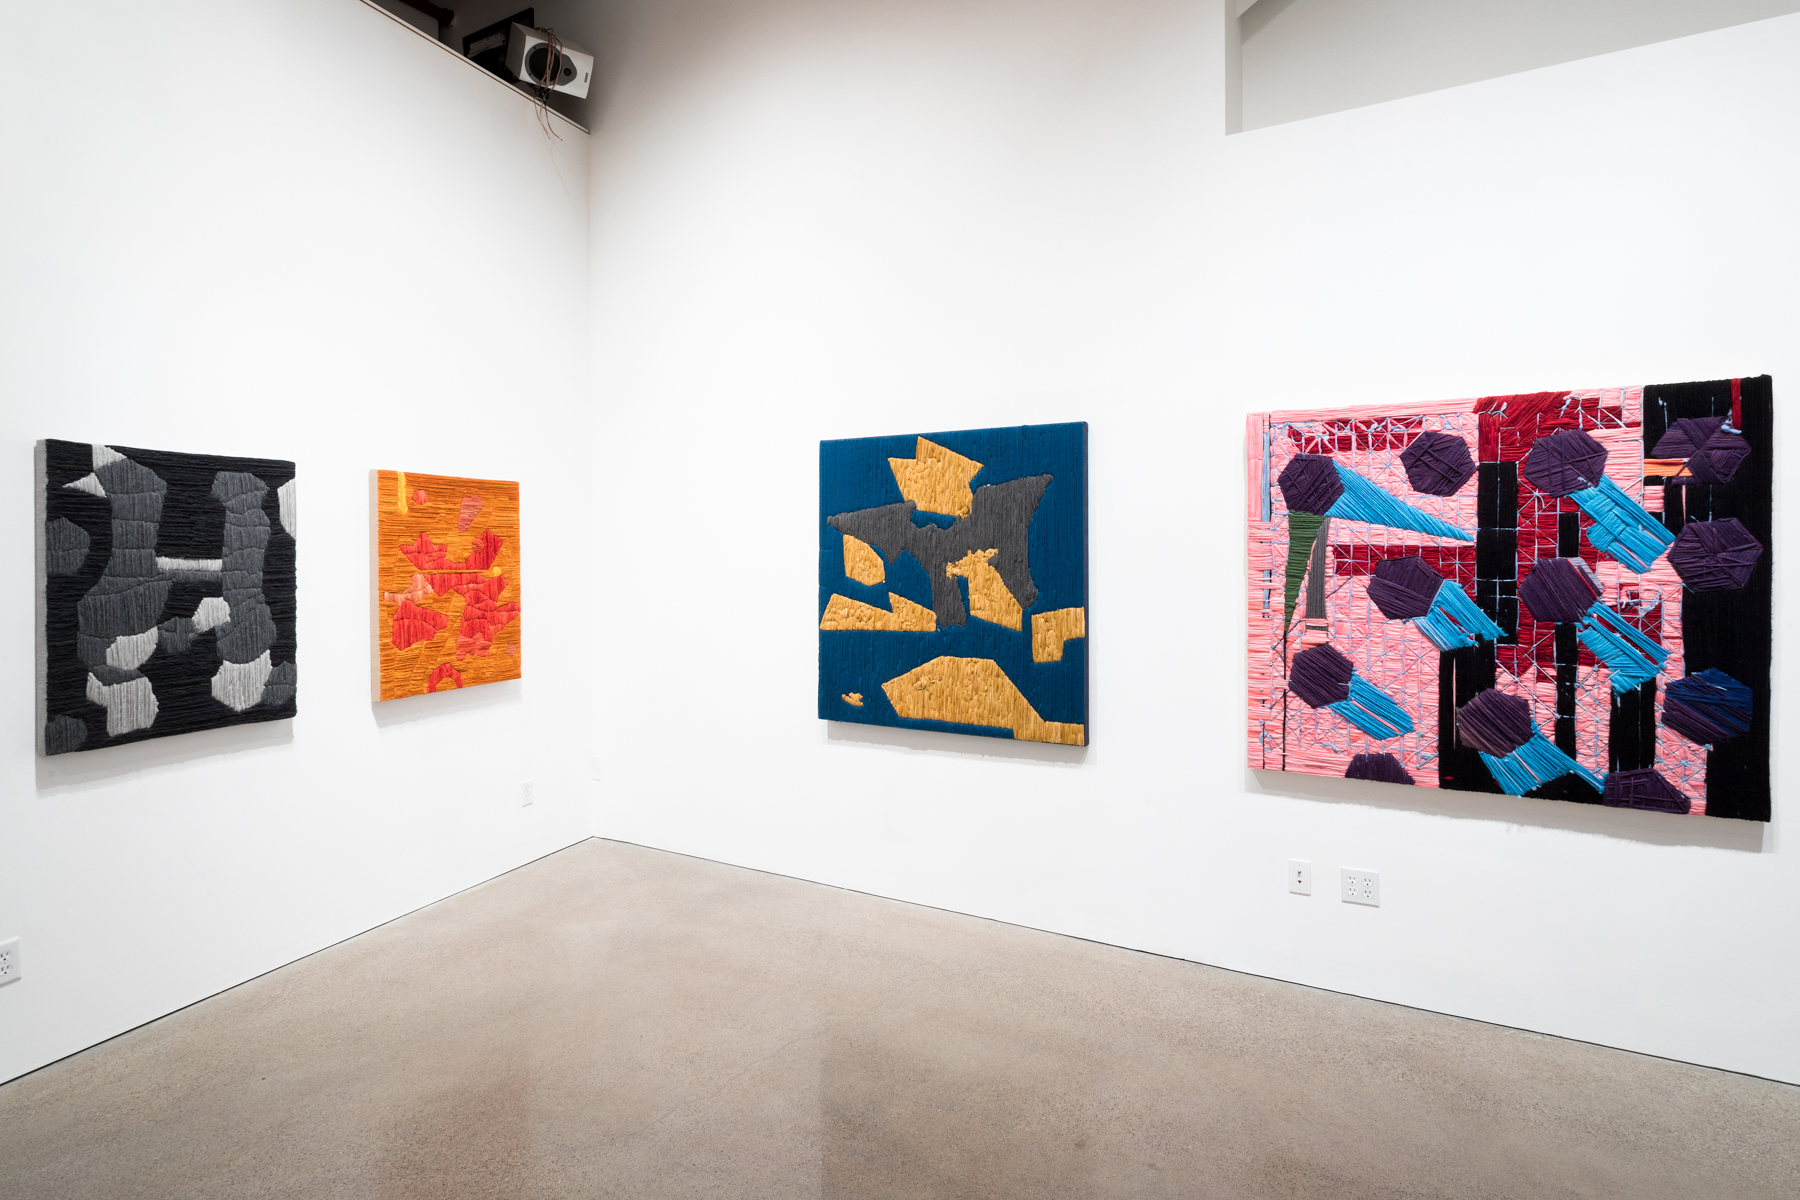 Installation view of System One at United Contemporary Gallery, Toronto, Canada, December 2018